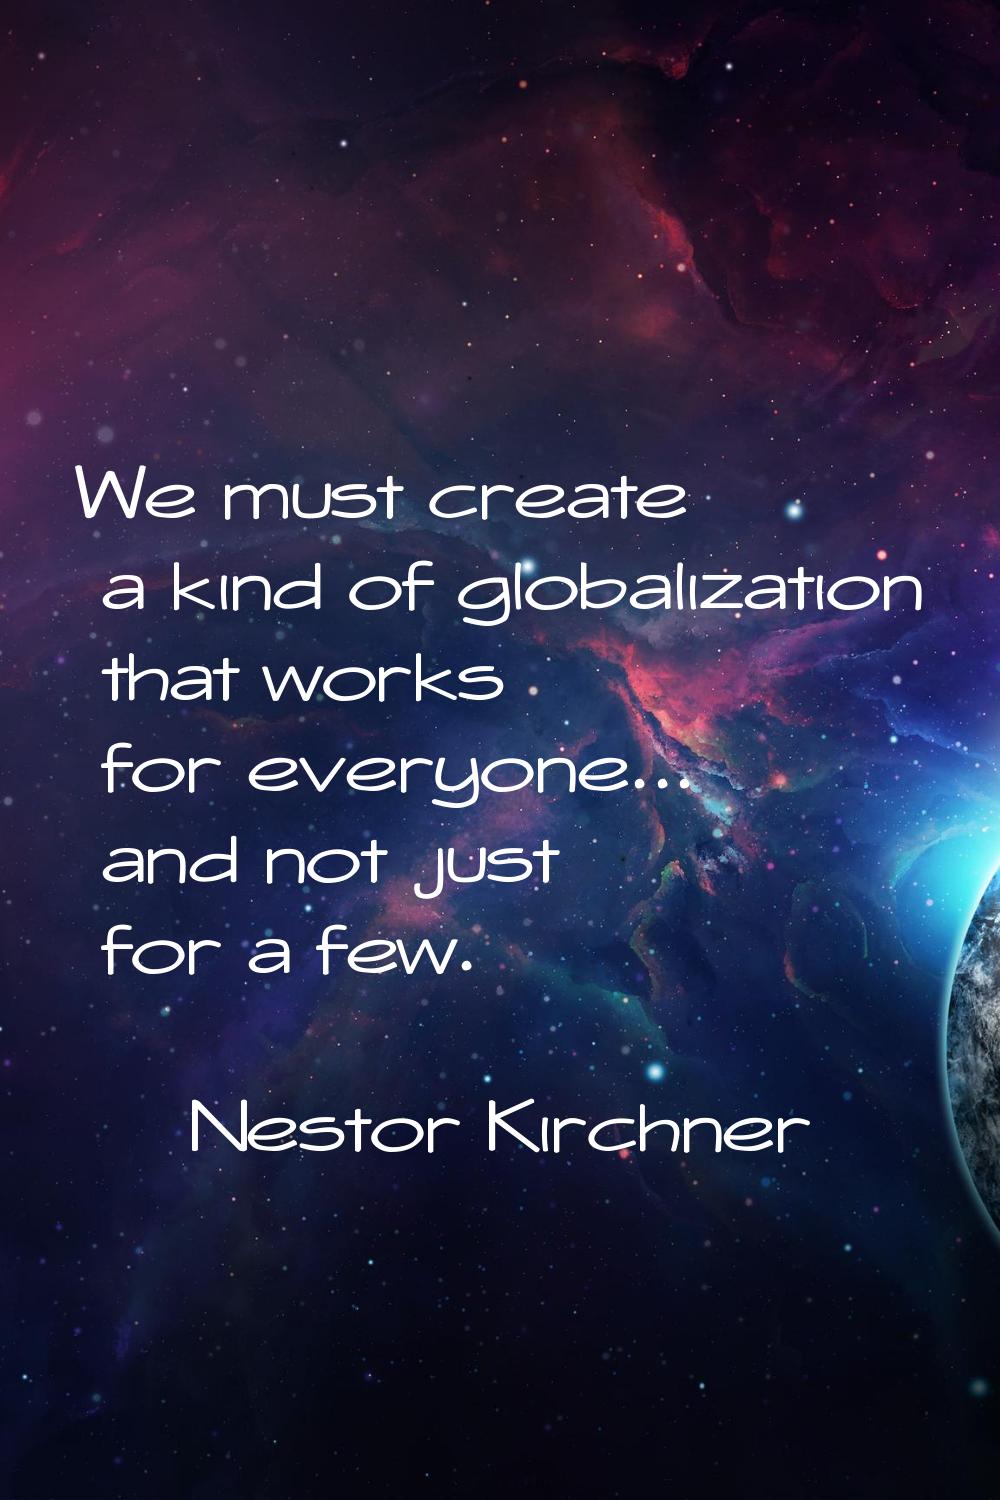 We must create a kind of globalization that works for everyone... and not just for a few.